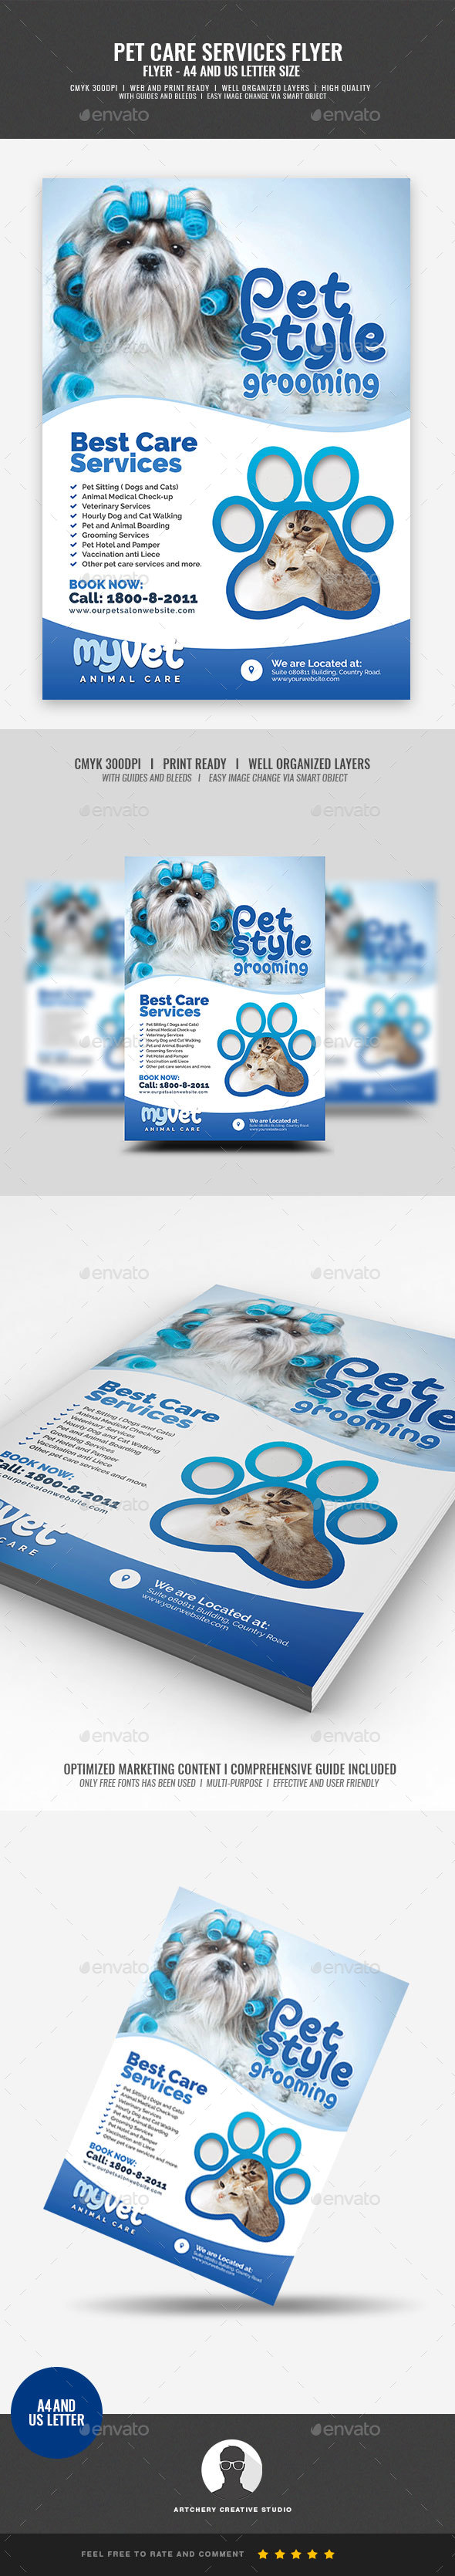 Pet Grooming and Veterinary Services Flyer